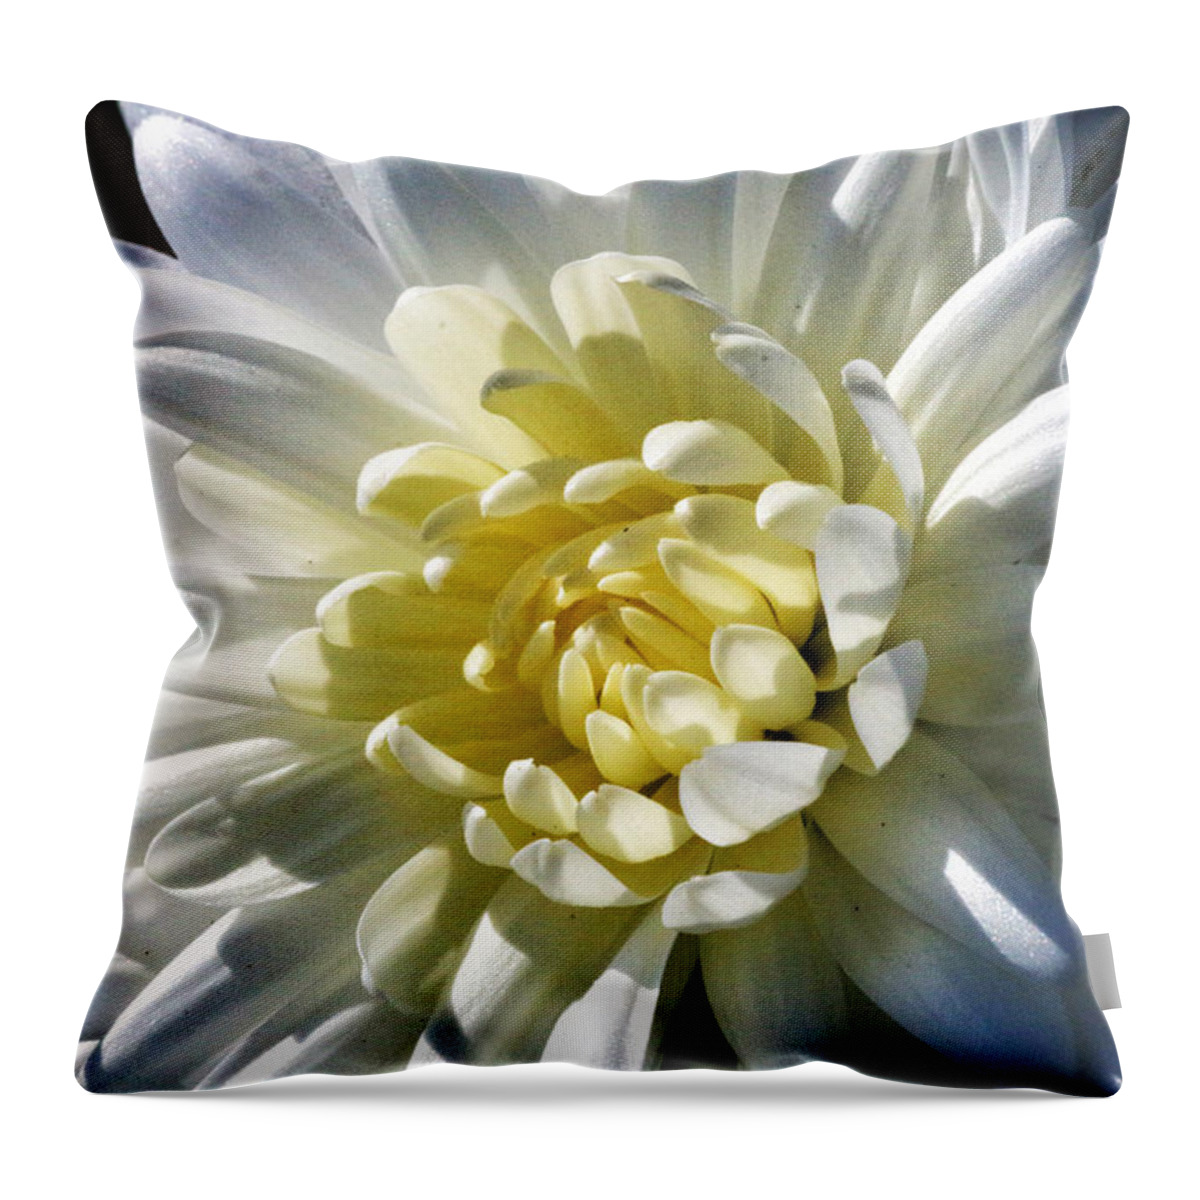 Flower Throw Pillow featuring the photograph Chrysanthemum in Sunlight by William Selander